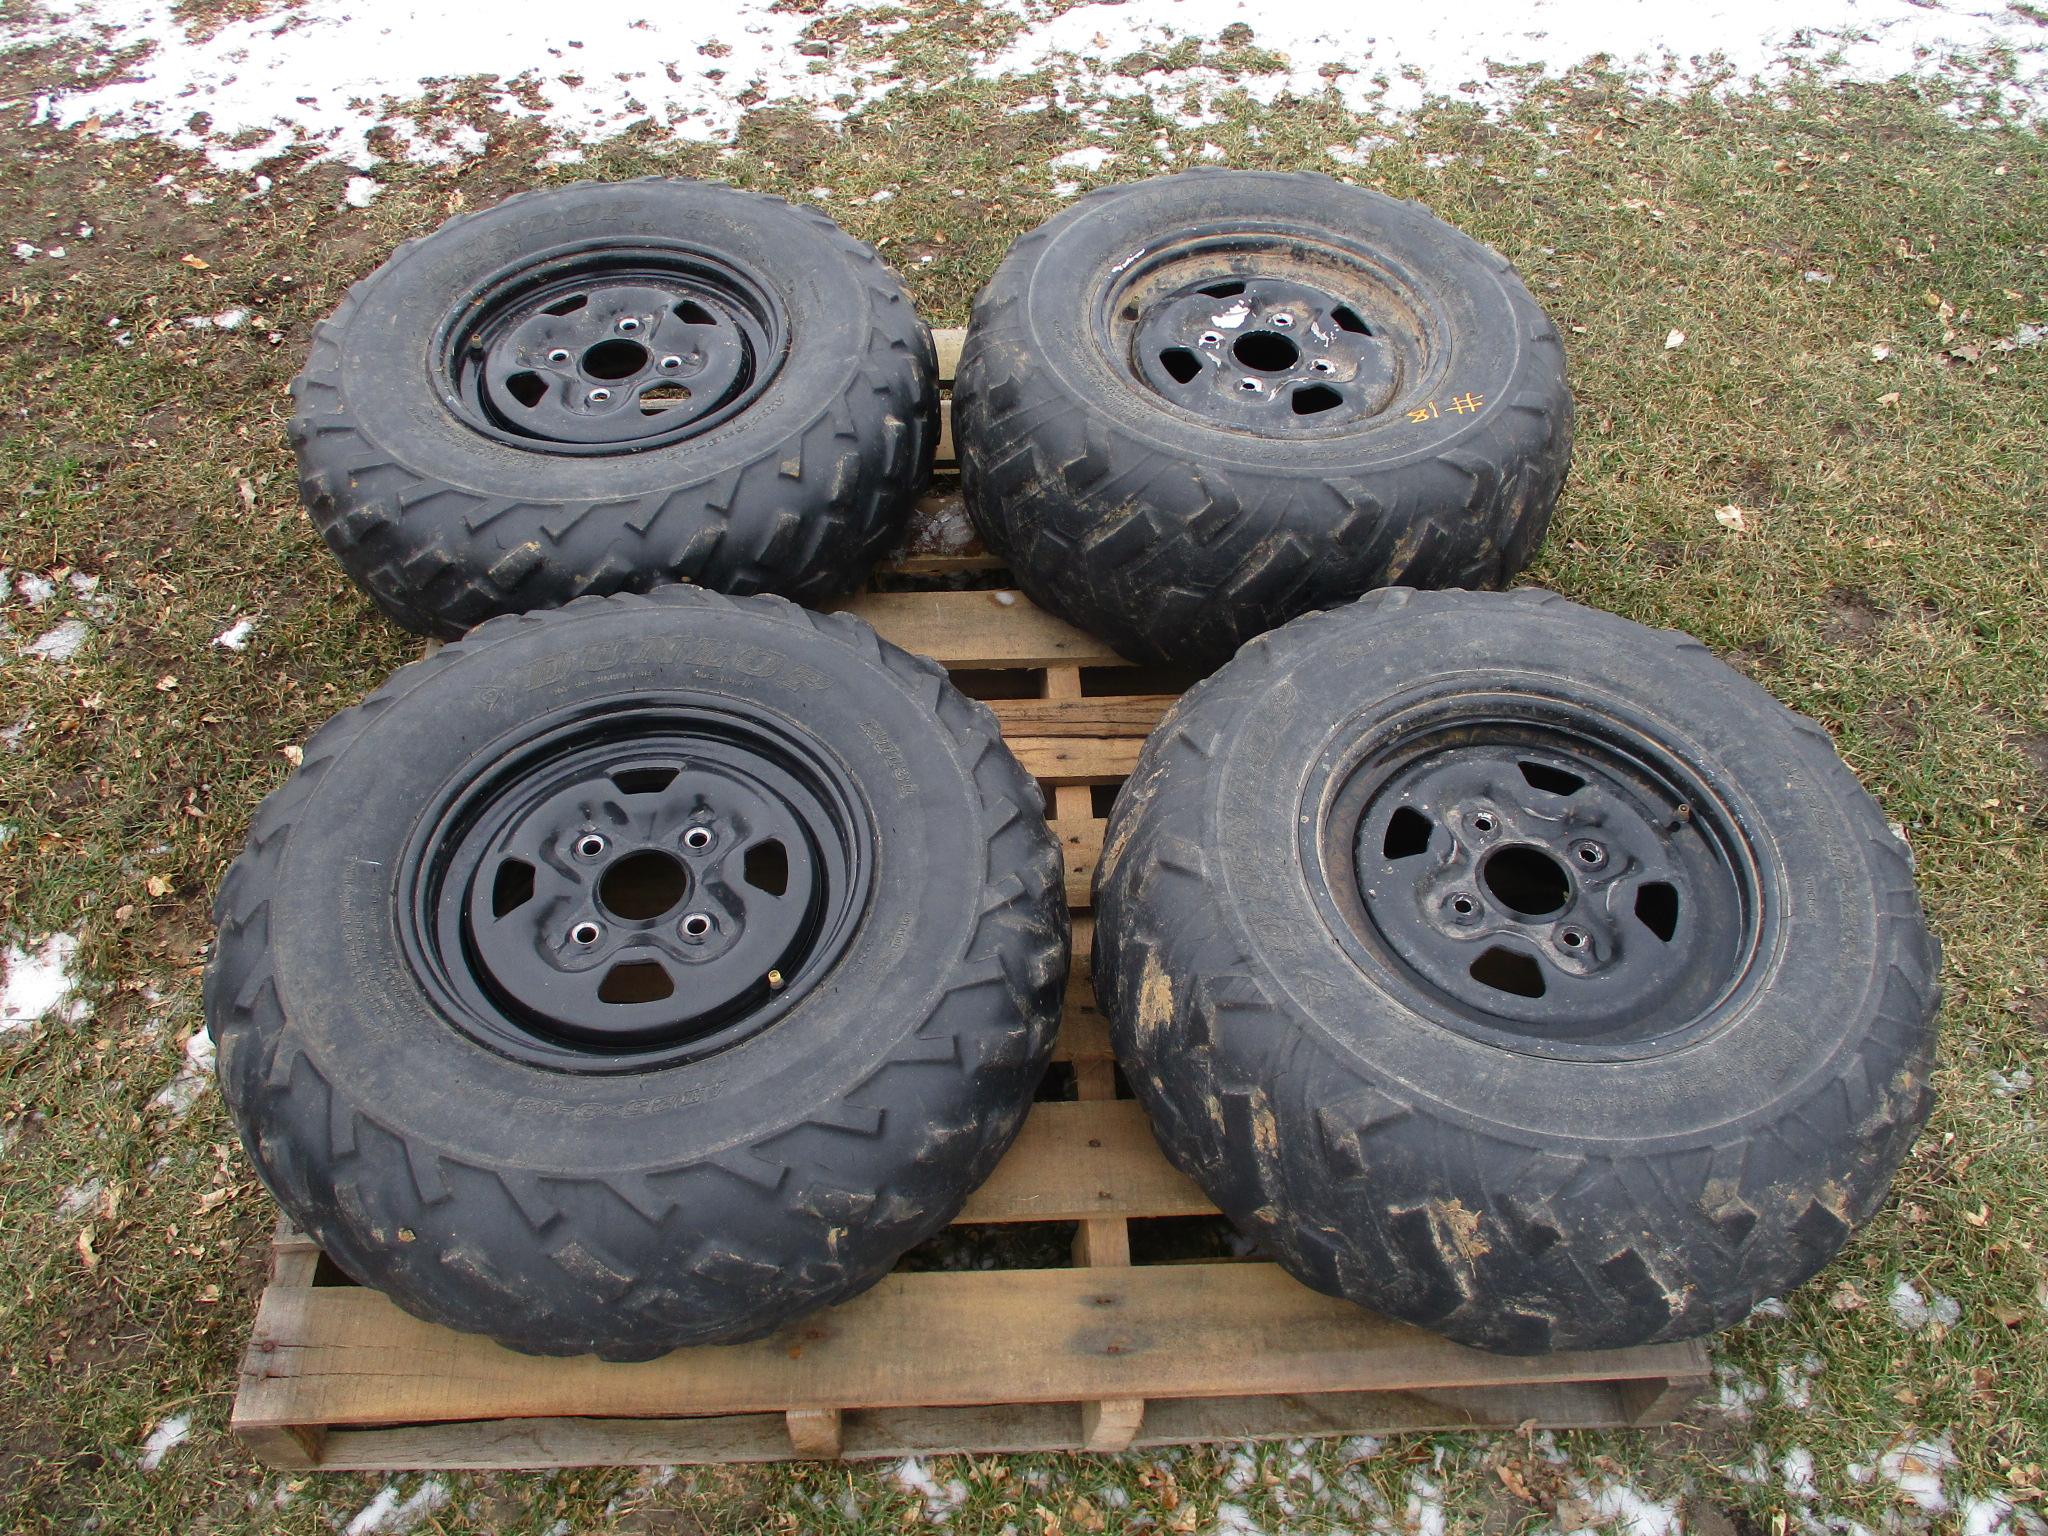 ATV tires two 25 x 8-12, two 25 x 10 - 12